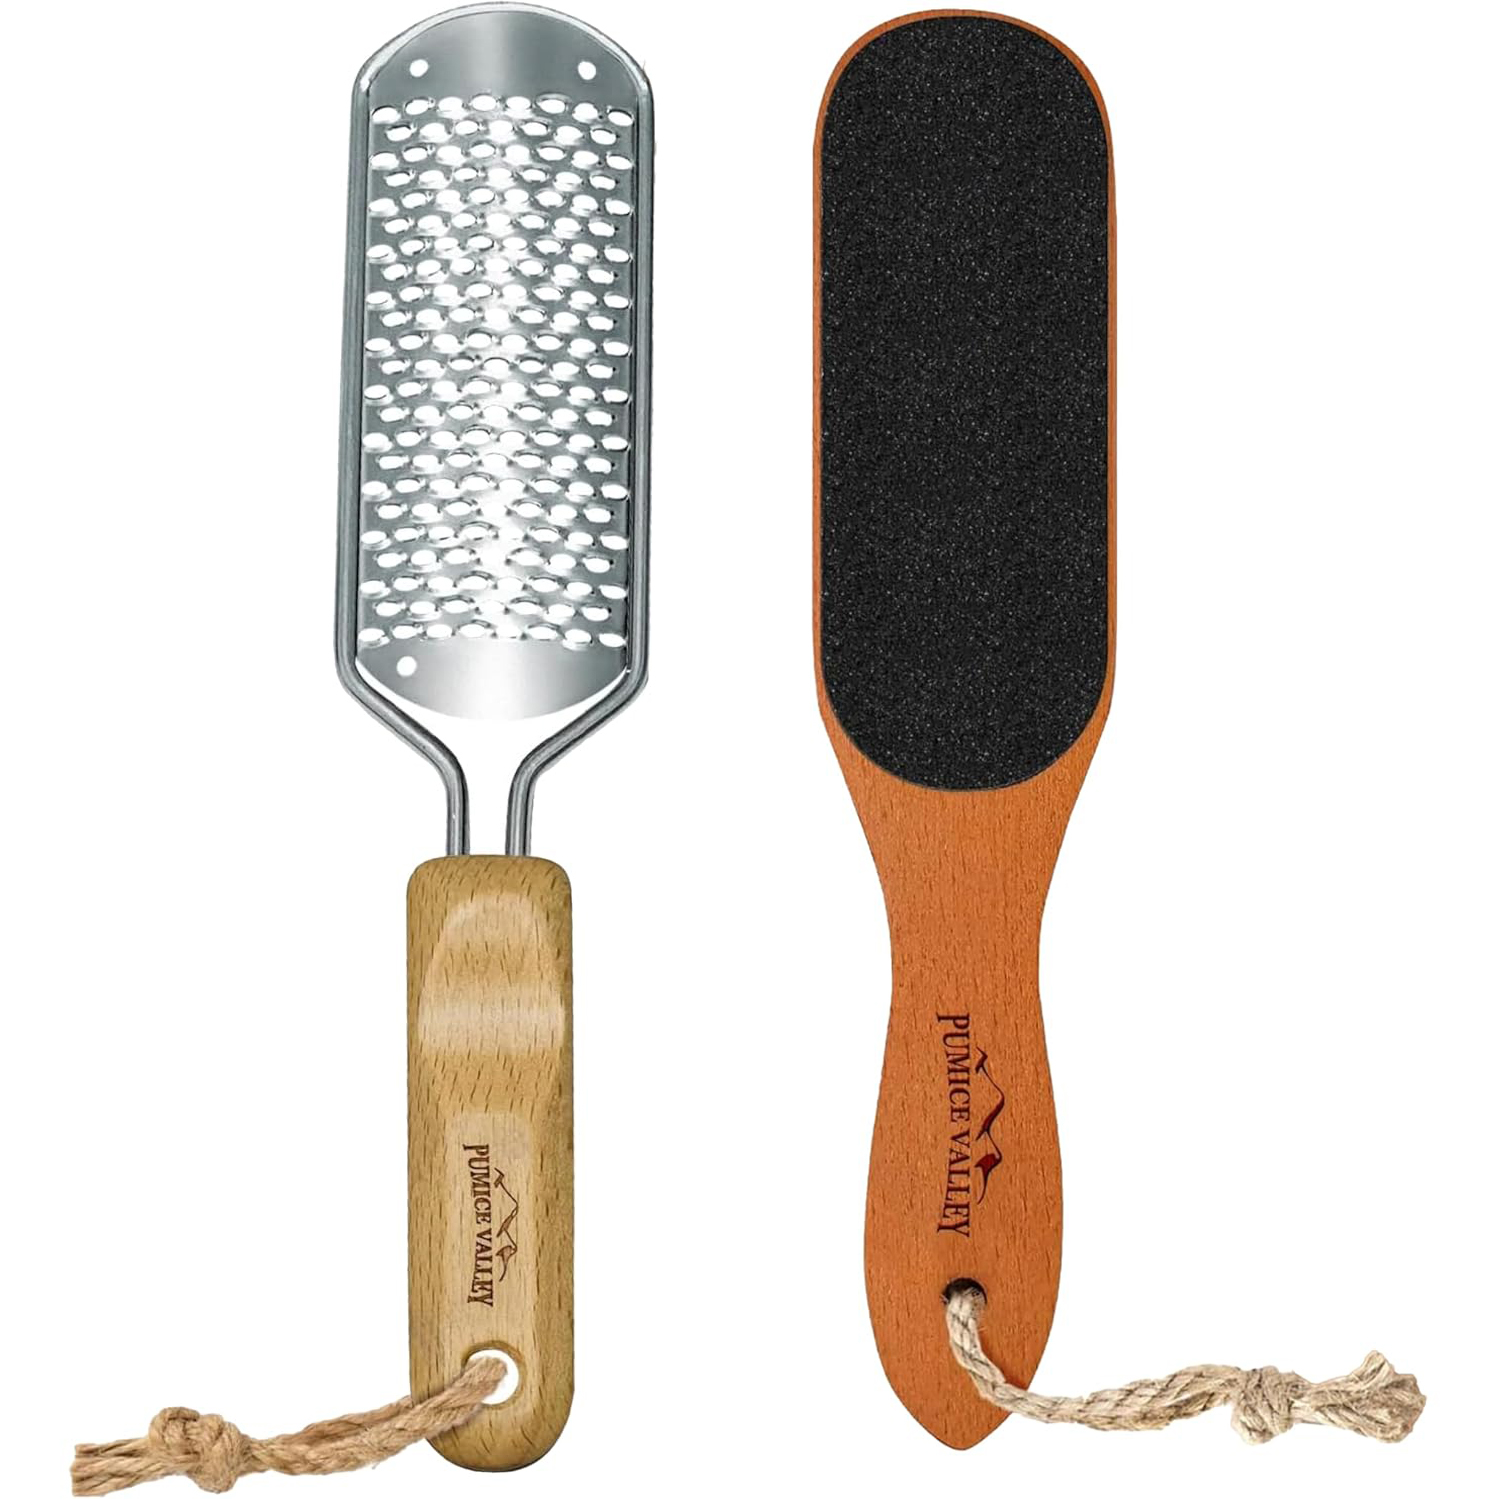 Pumice Stone Foot File & Professional Japanese Stainless Steel File